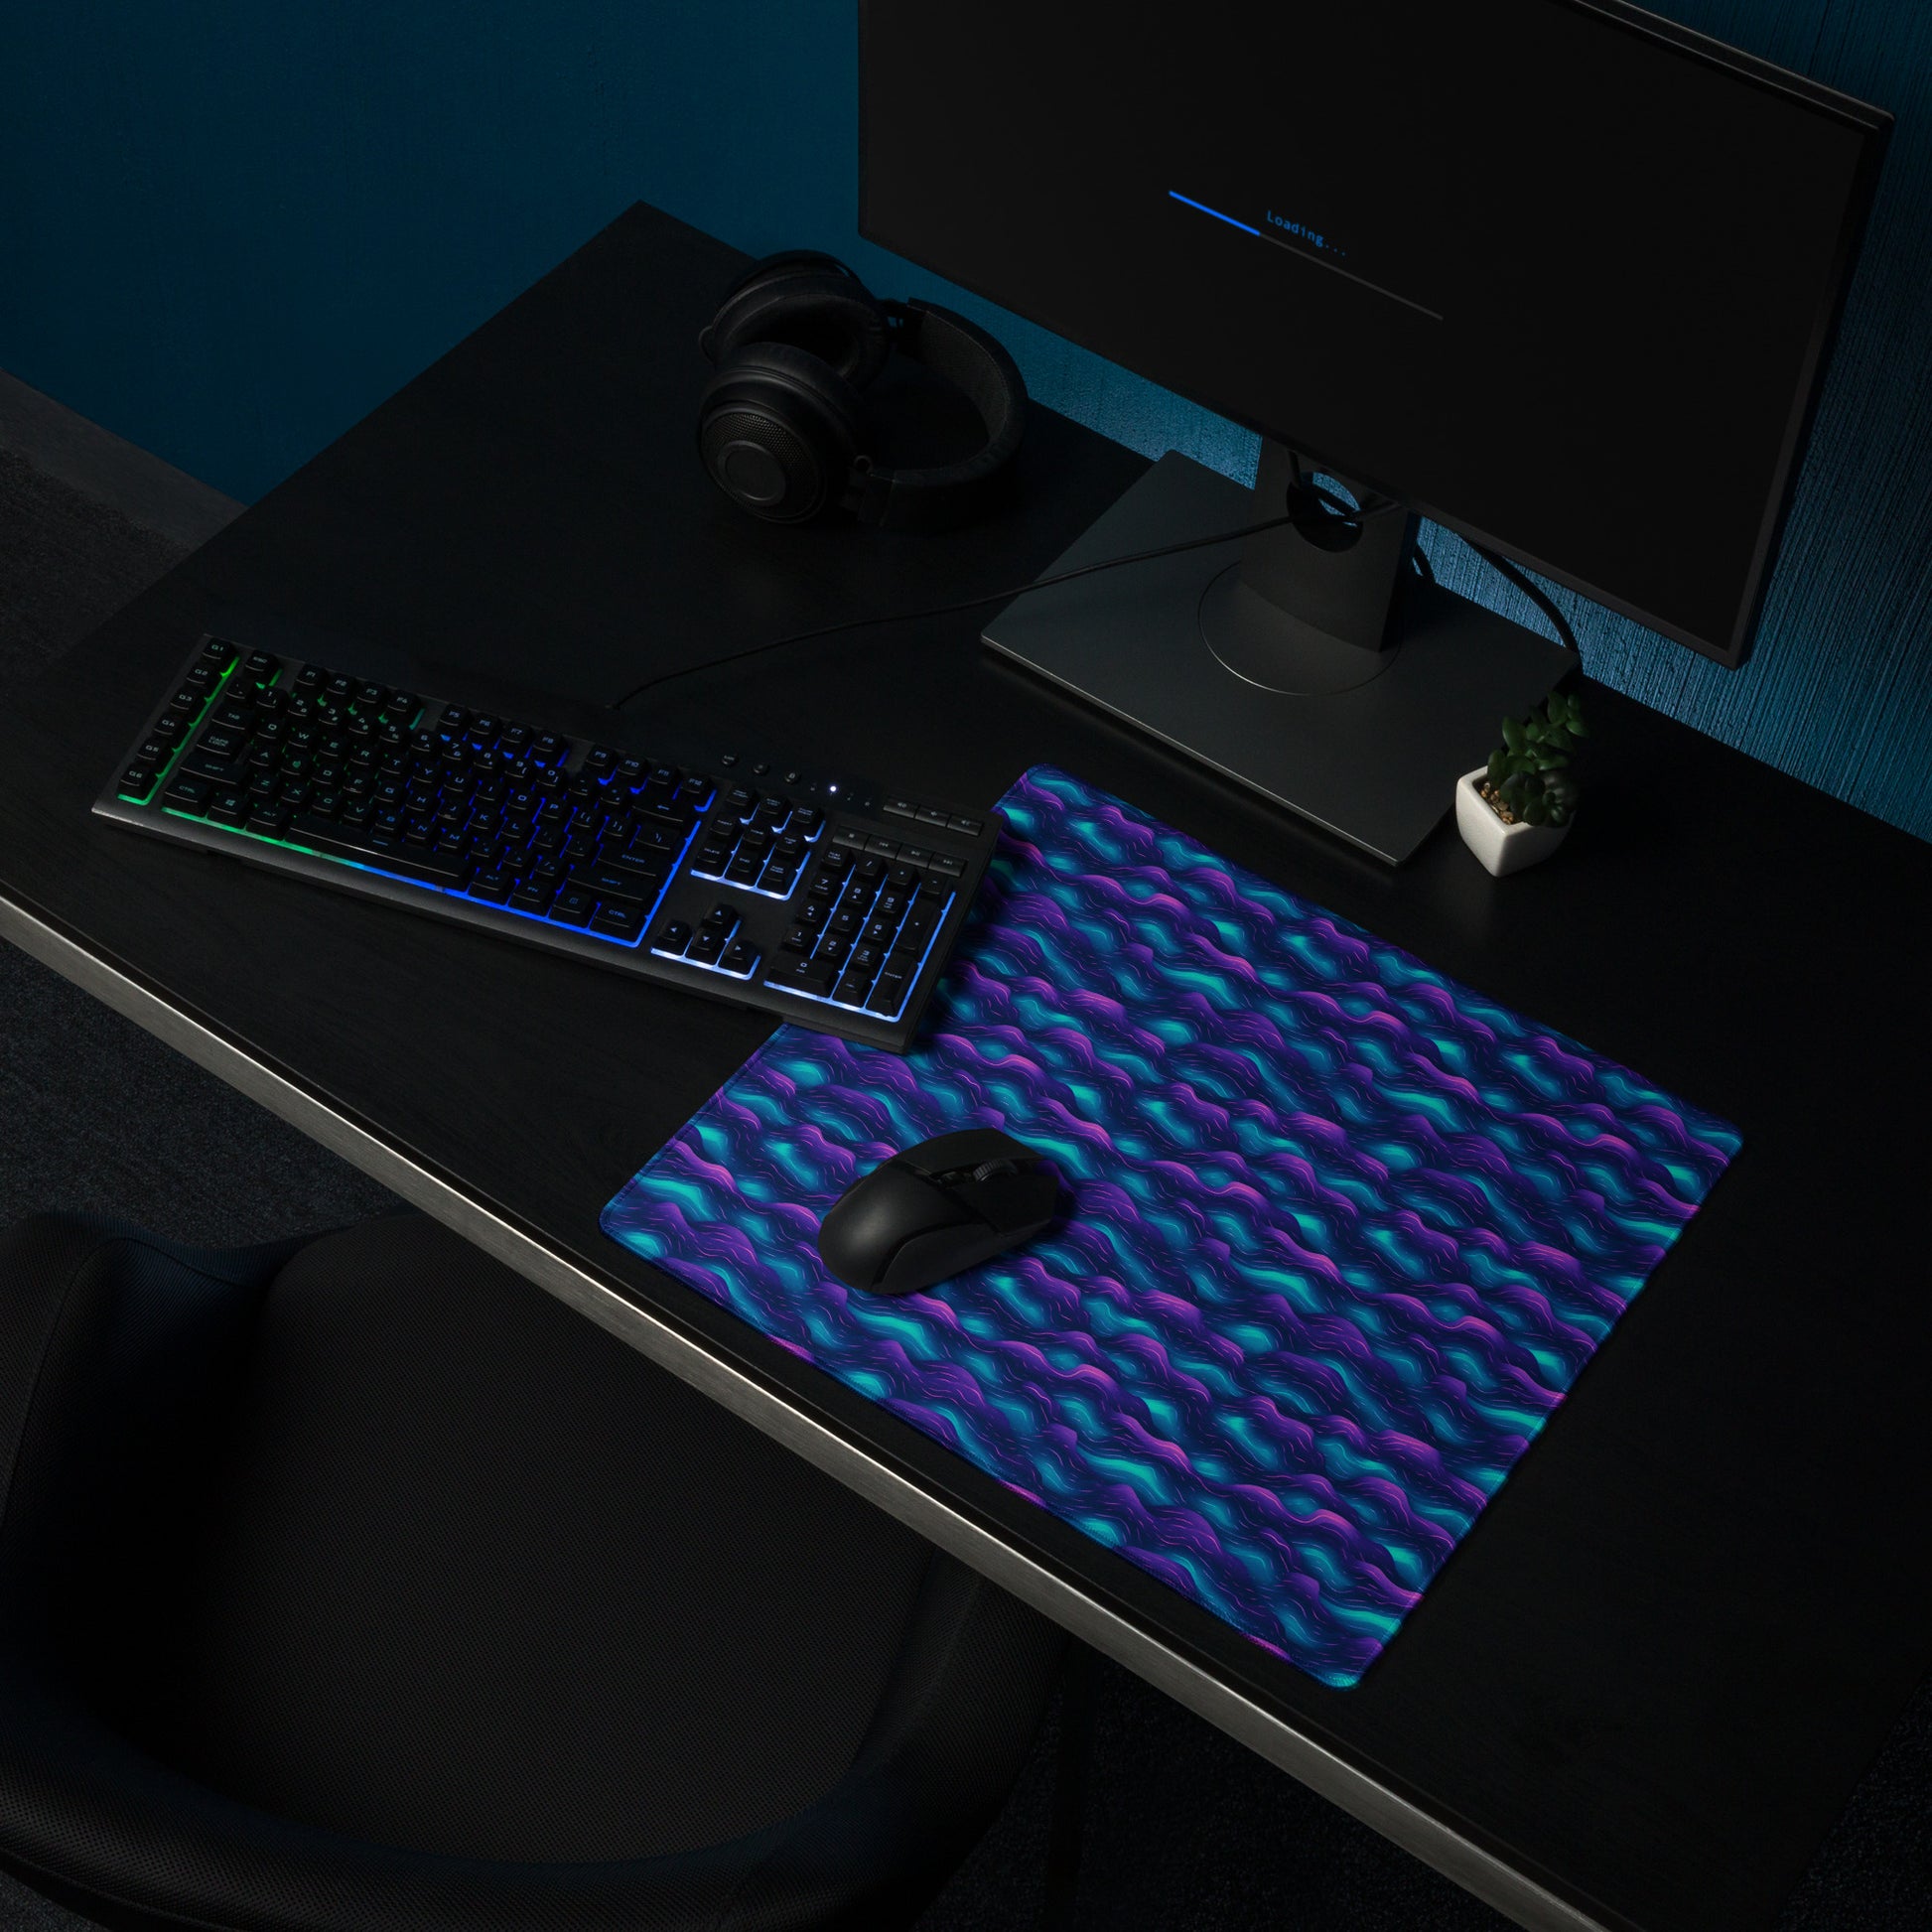 A 18" x 16" desk pad with blue and purple wave pattern sitting on a desk.